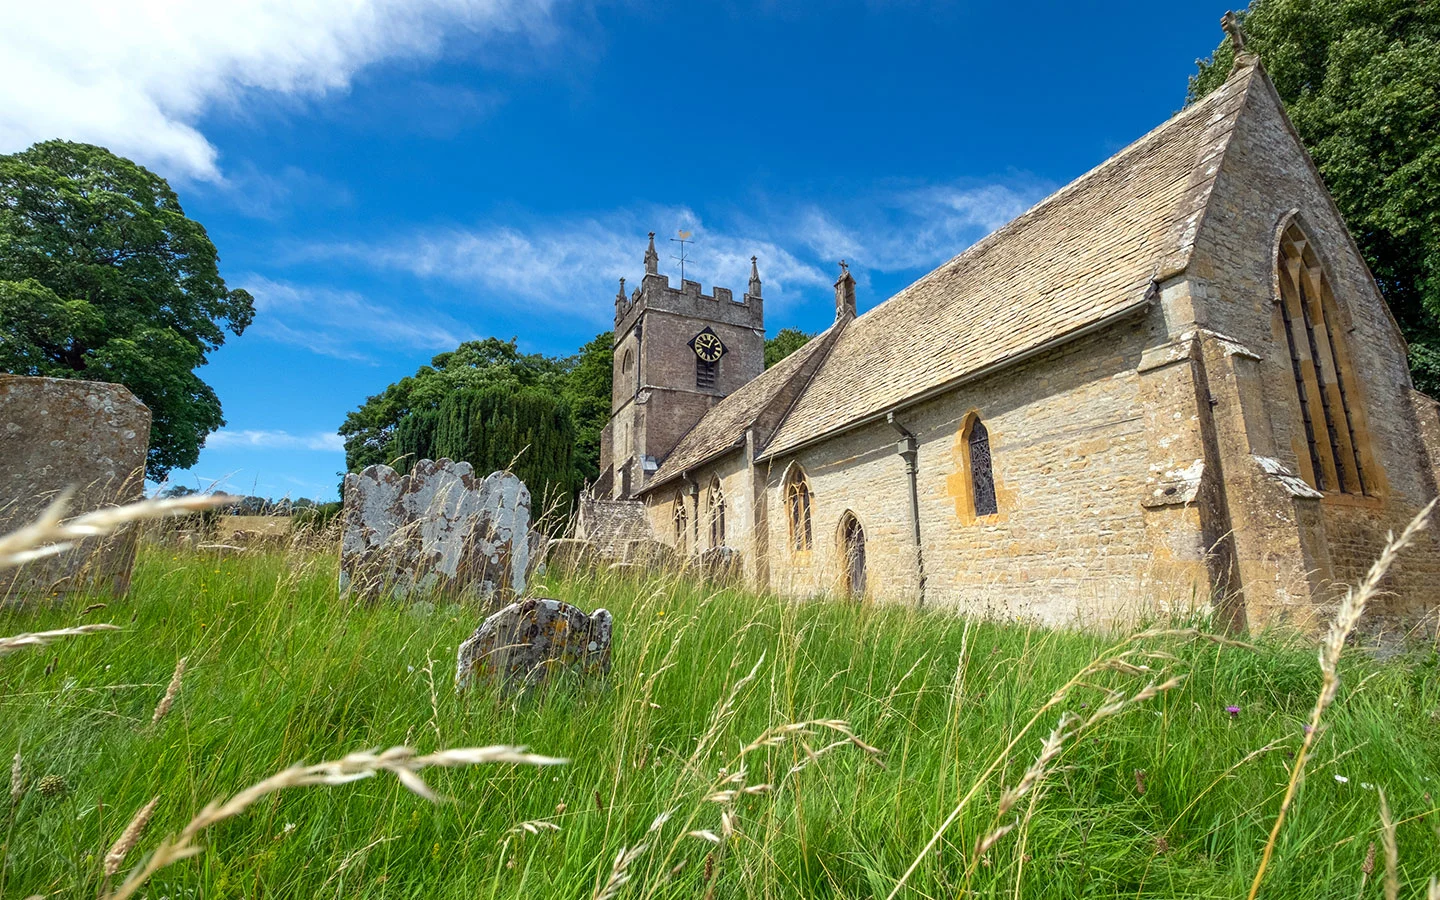 St Peter's Church, one of the things to do in Upper Slaughter in the Cotswolds